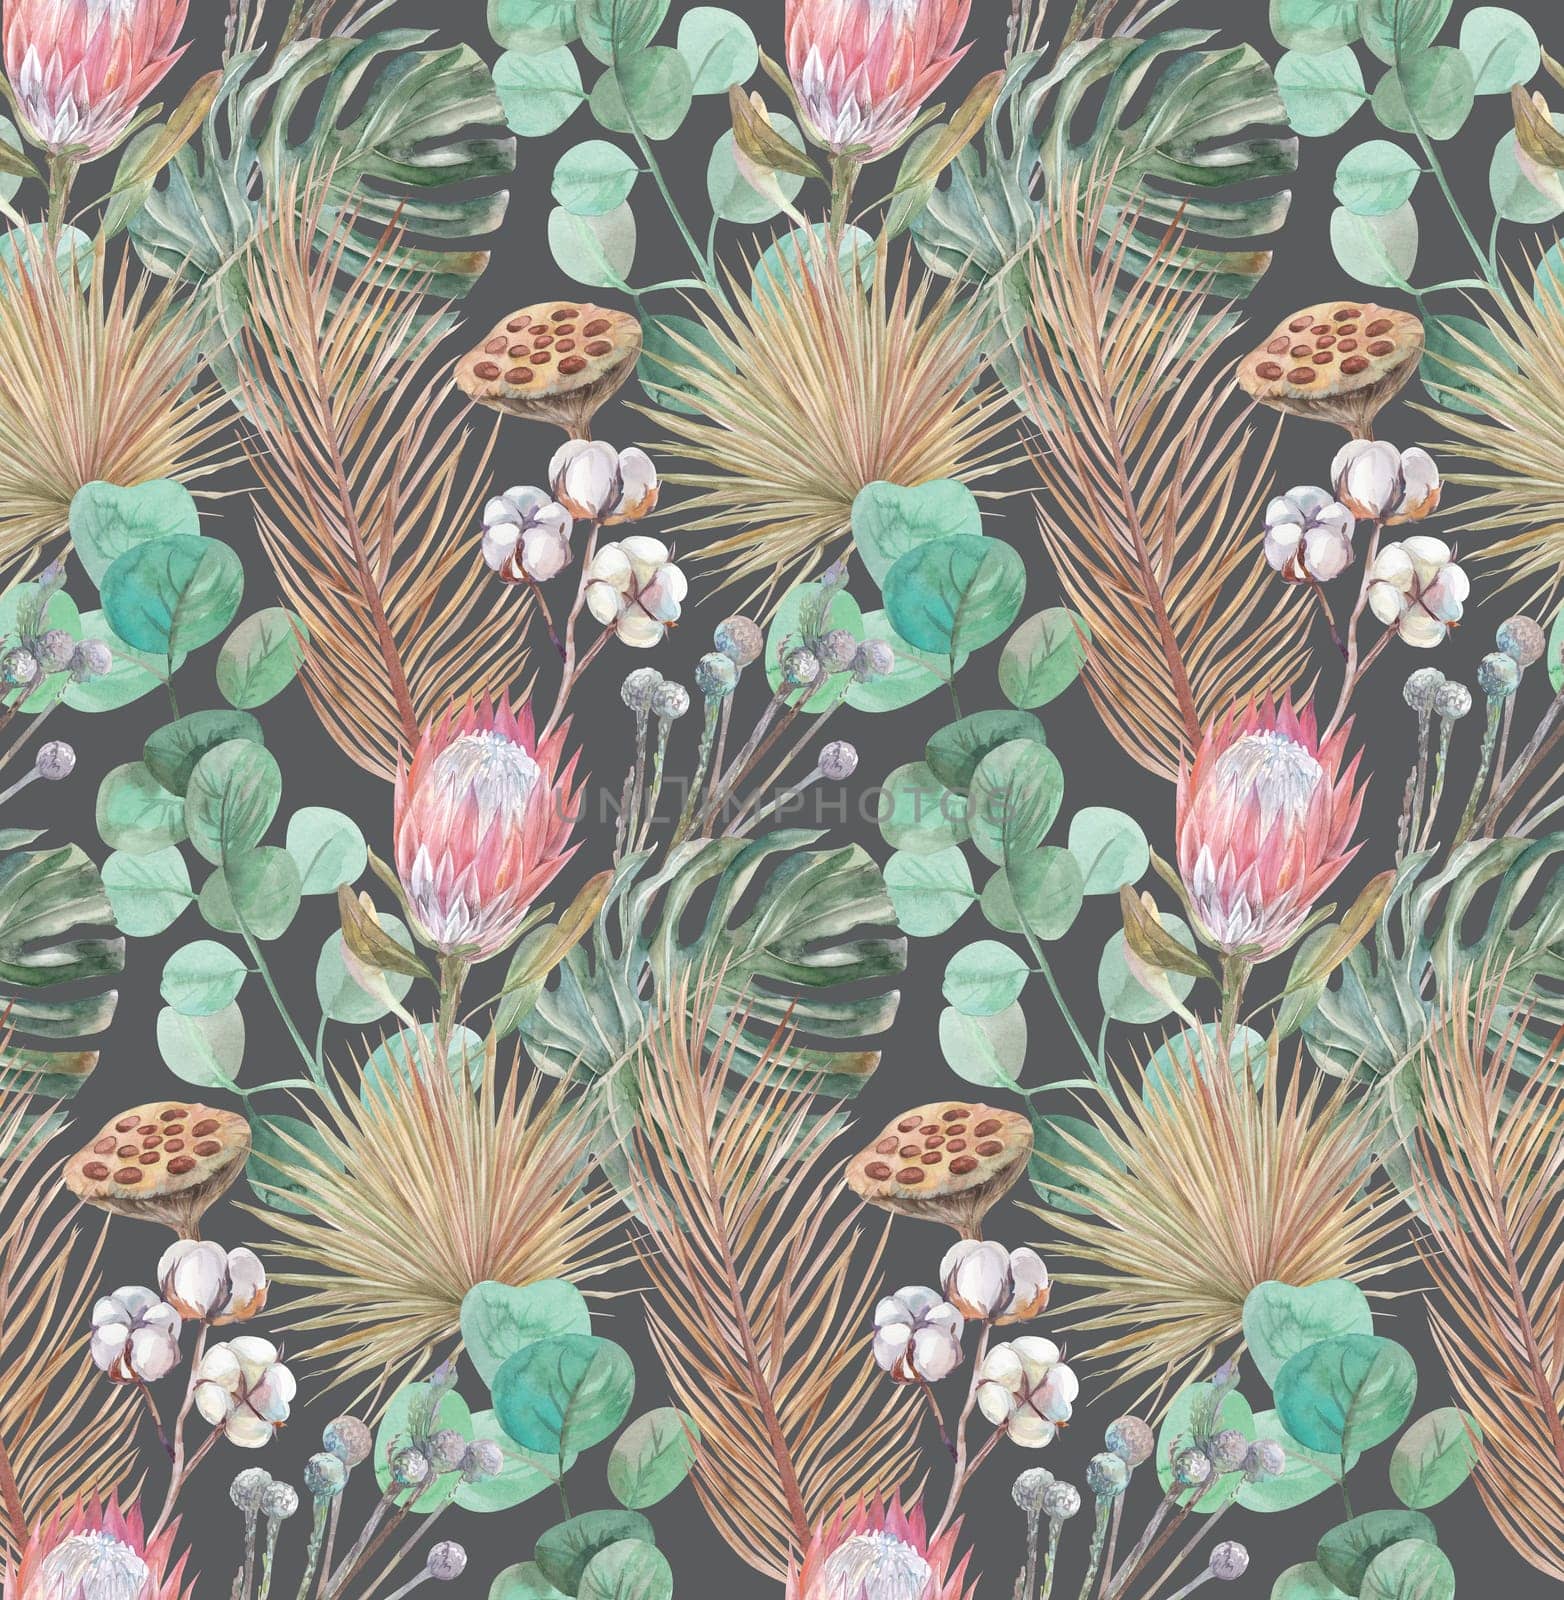 watercolor modern boho pattern with tropical dried flowers by MarinaVoyush